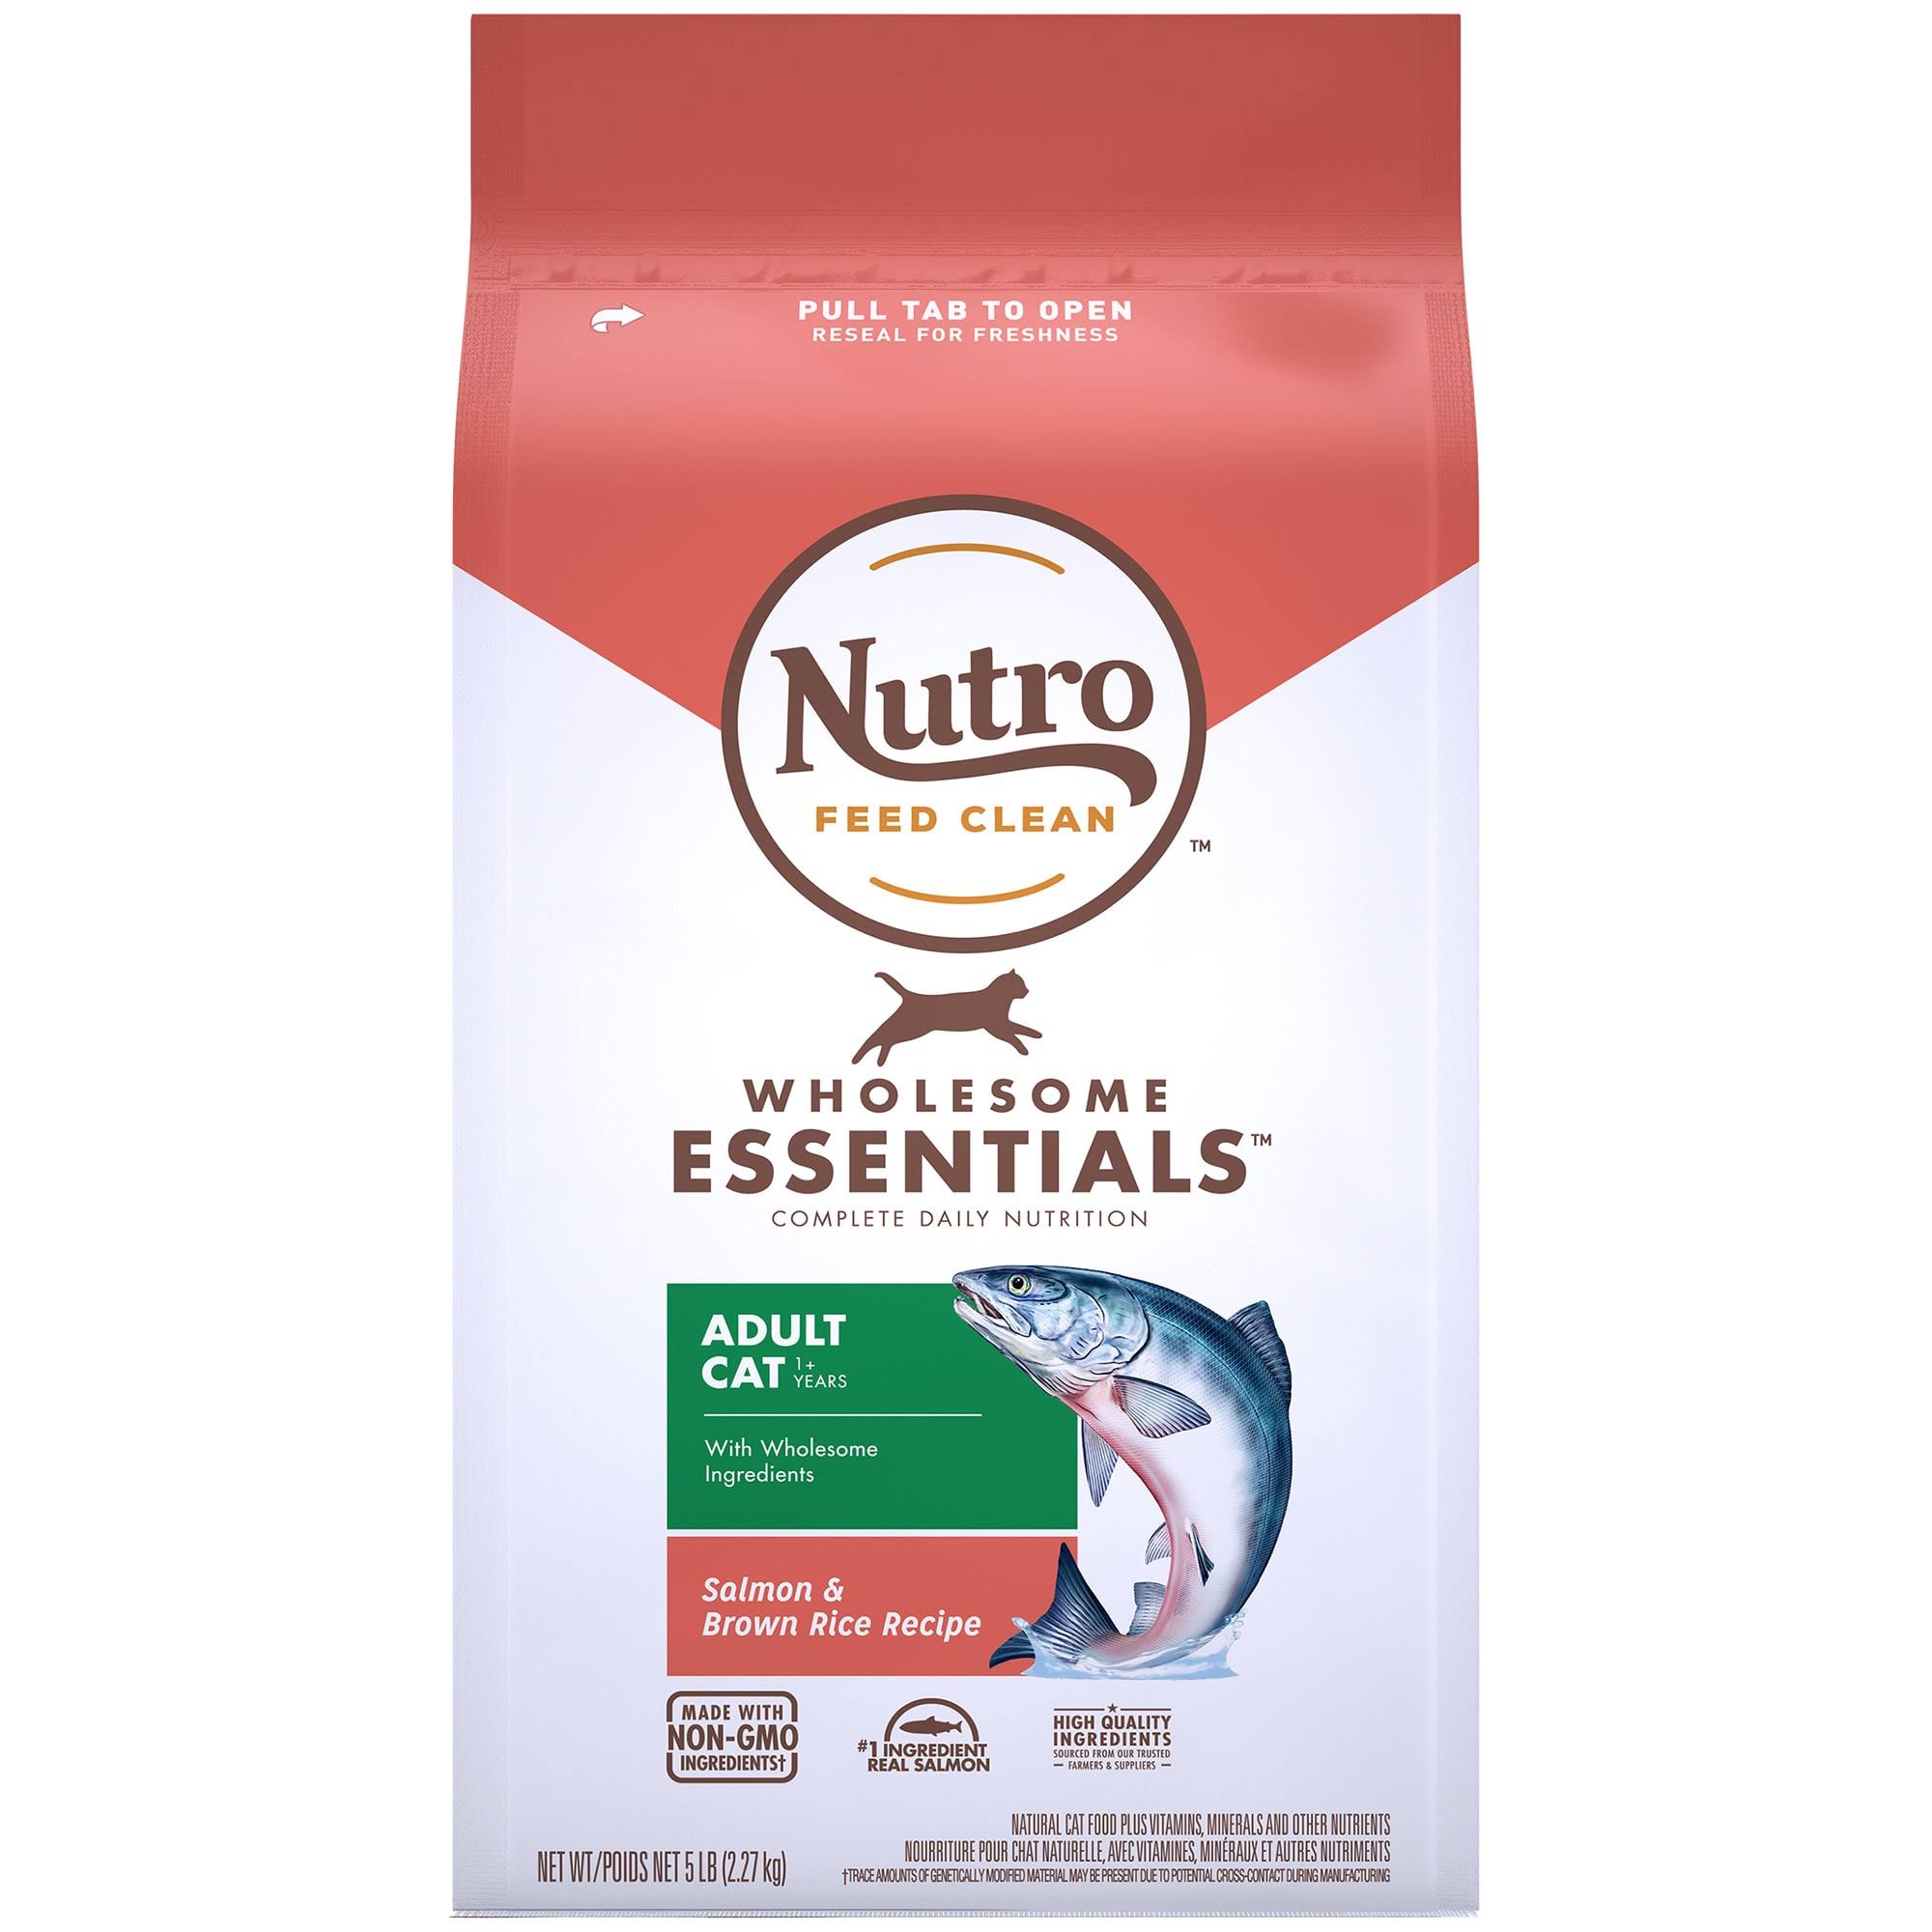 Nutro Wholesome Essentials Natural Dry Cat Food, Adult Cat Salmon and Brown Rice Recipe, 2.3kg. Bag | Cats